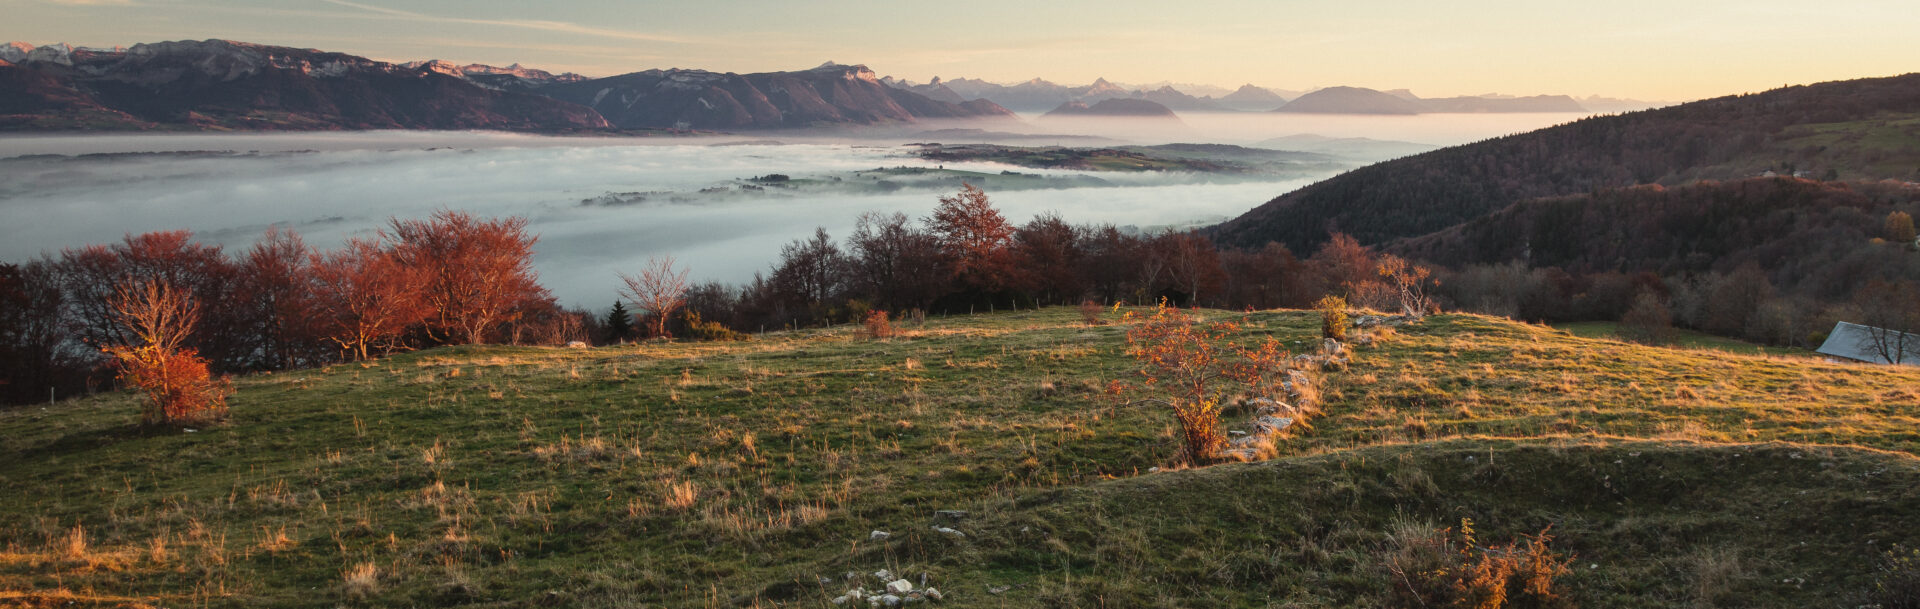 500px photo id: 1013102359 a view over lake annecy and the mountains on a foggy autumnal afternoon from mont salève of course!